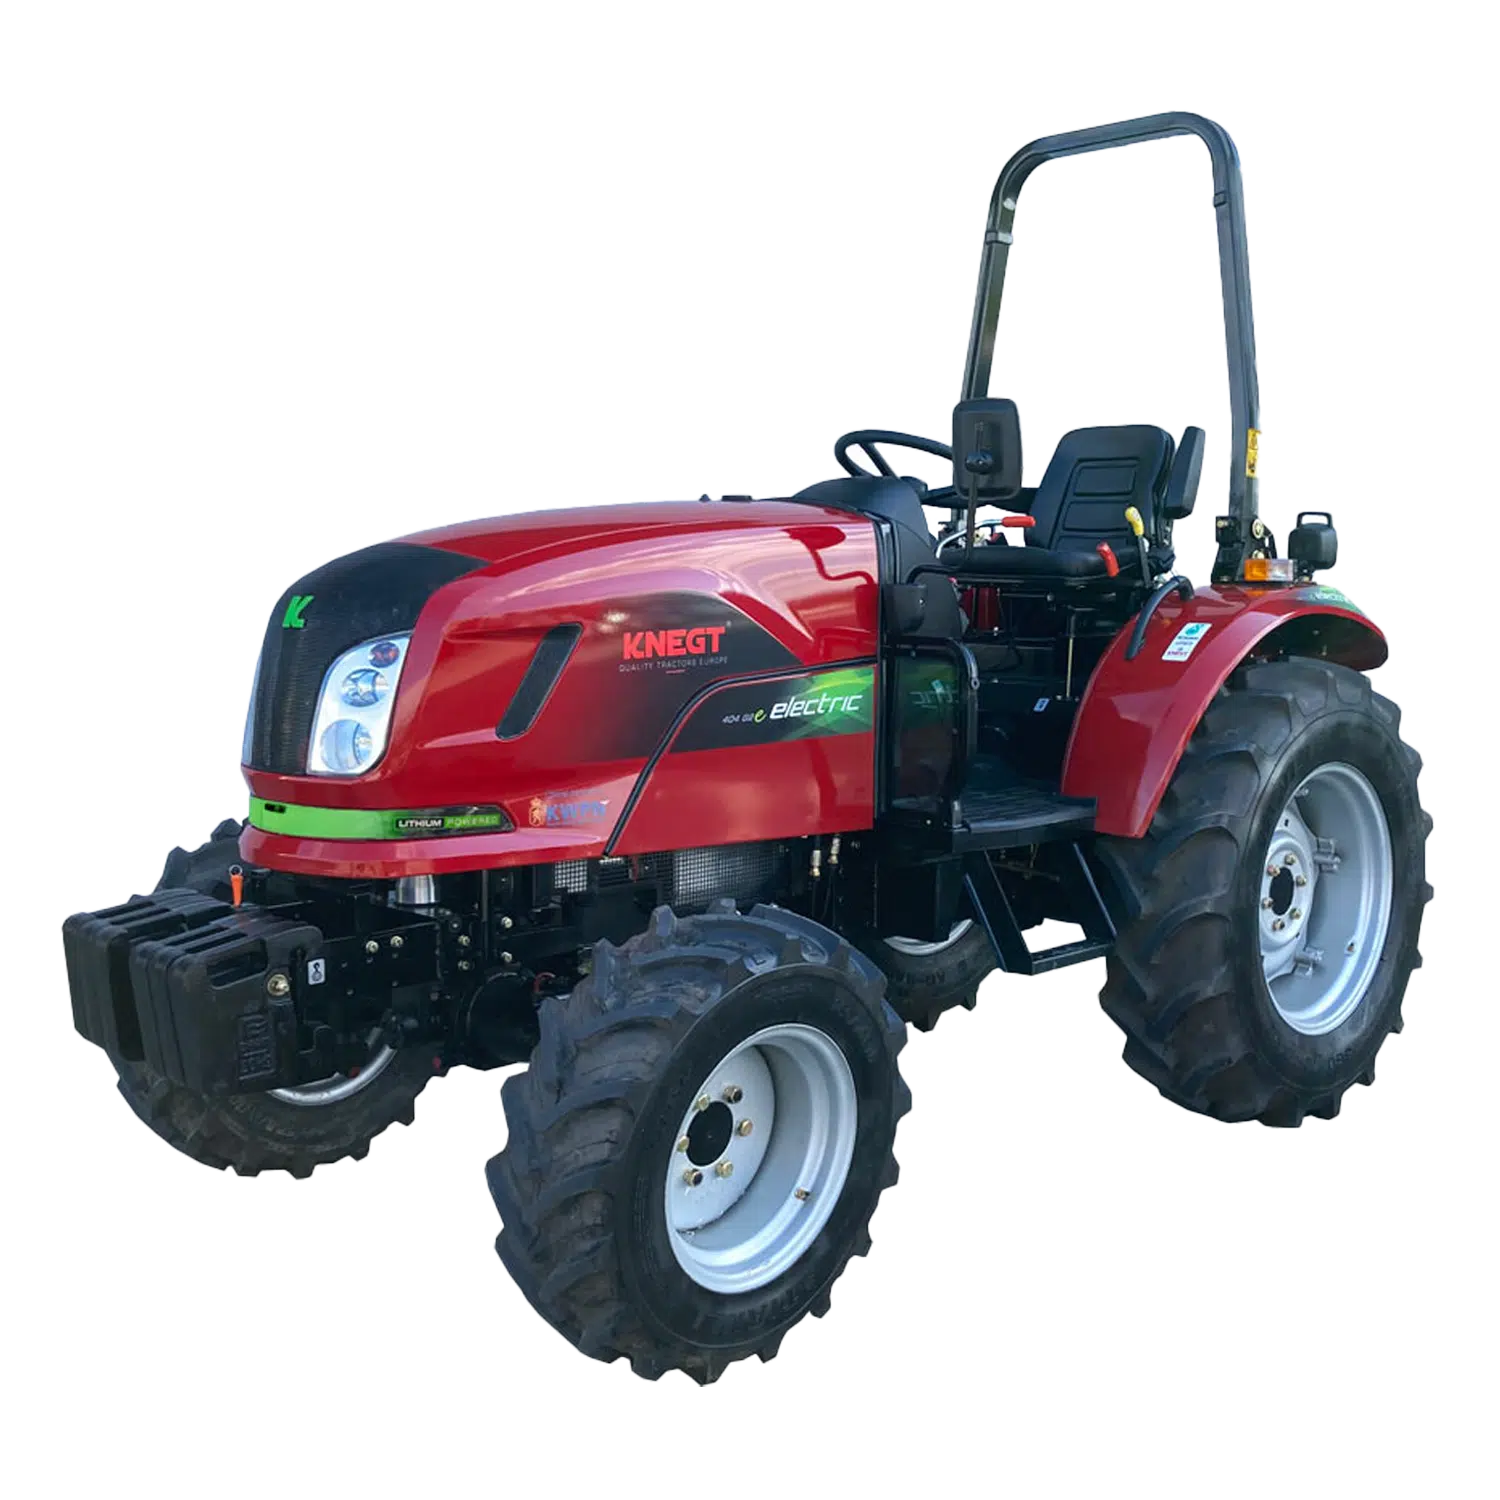 knegt_compact_tractor_404G2E_productfoto